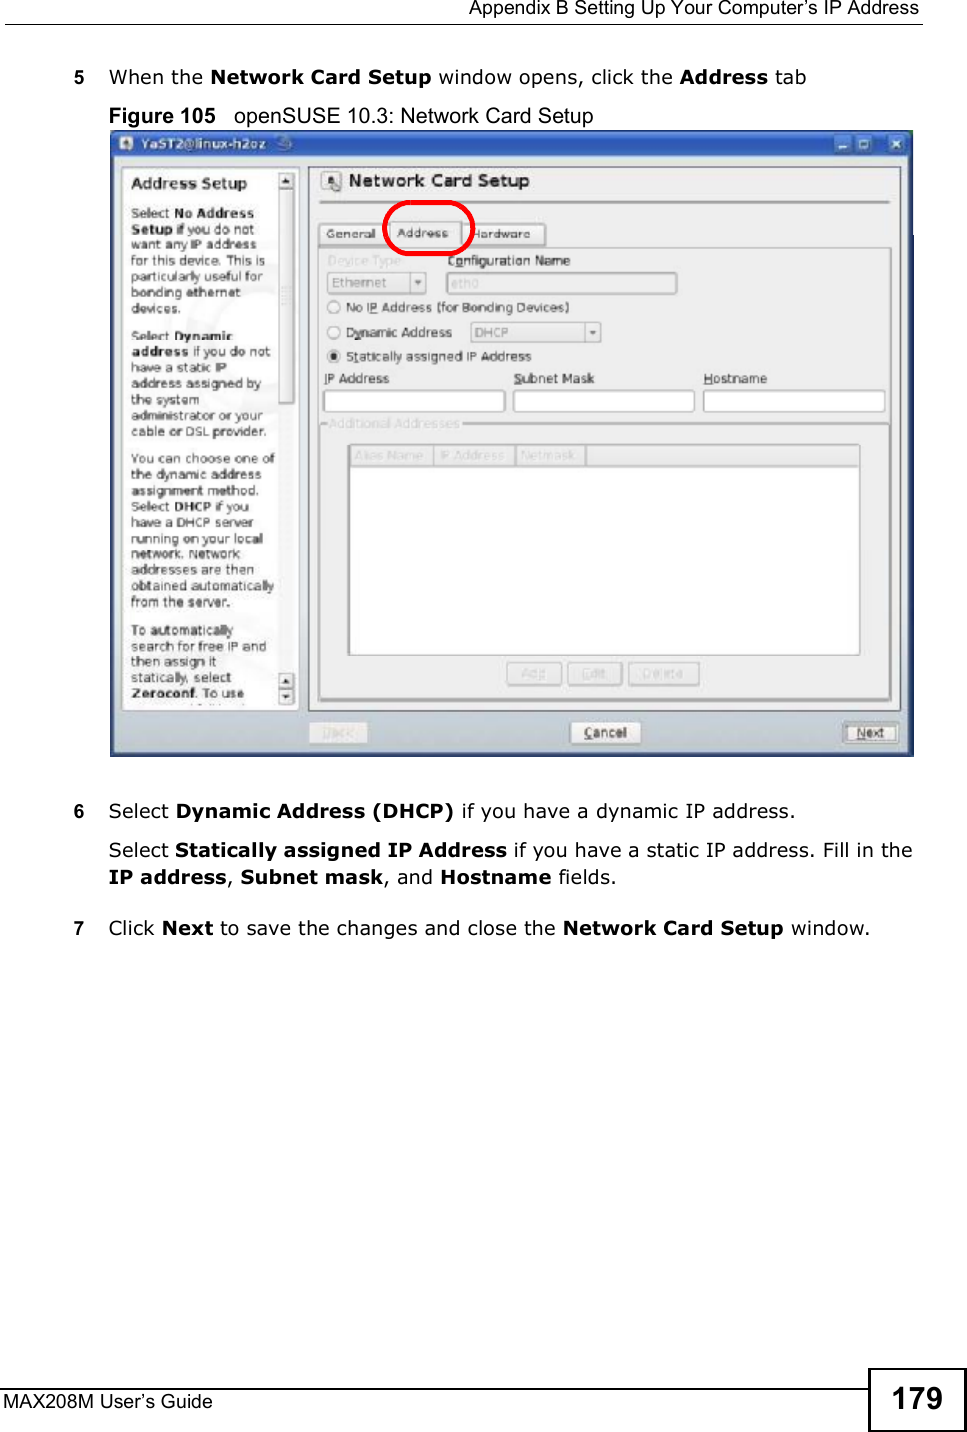  Appendix BSetting Up Your Computer s IP AddressMAX208M User s Guide 1795When the Network Card Setup window opens, click the Address tabFigure 105   openSUSE 10.3: Network Card Setup6Select Dynamic Address (DHCP) if you have a dynamic IP address.Select Statically assigned IP Address if you have a static IP address. Fill in the IP address, Subnet mask, and Hostname fields.7Click Next to save the changes and close the Network Card Setup window. 